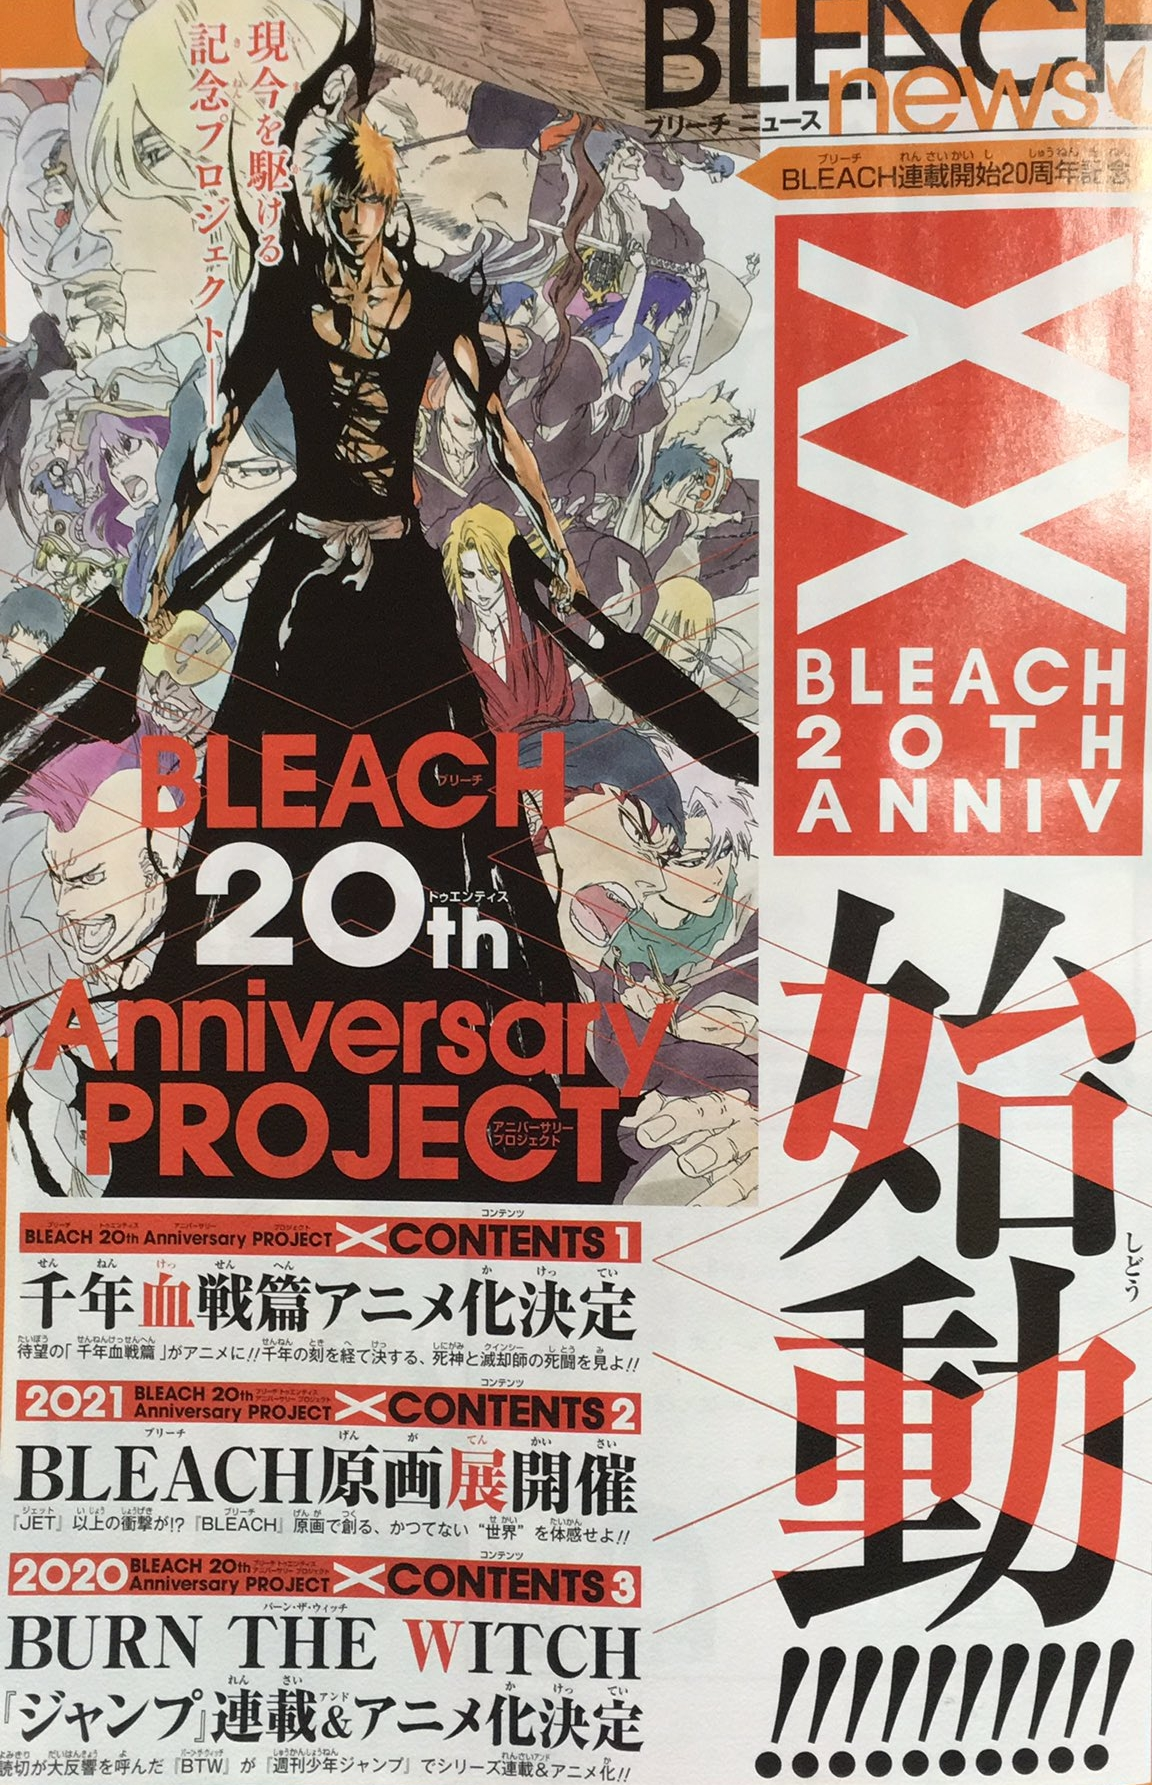 Bleach and CocaCola Team Up for Limited Edition Drink Collab